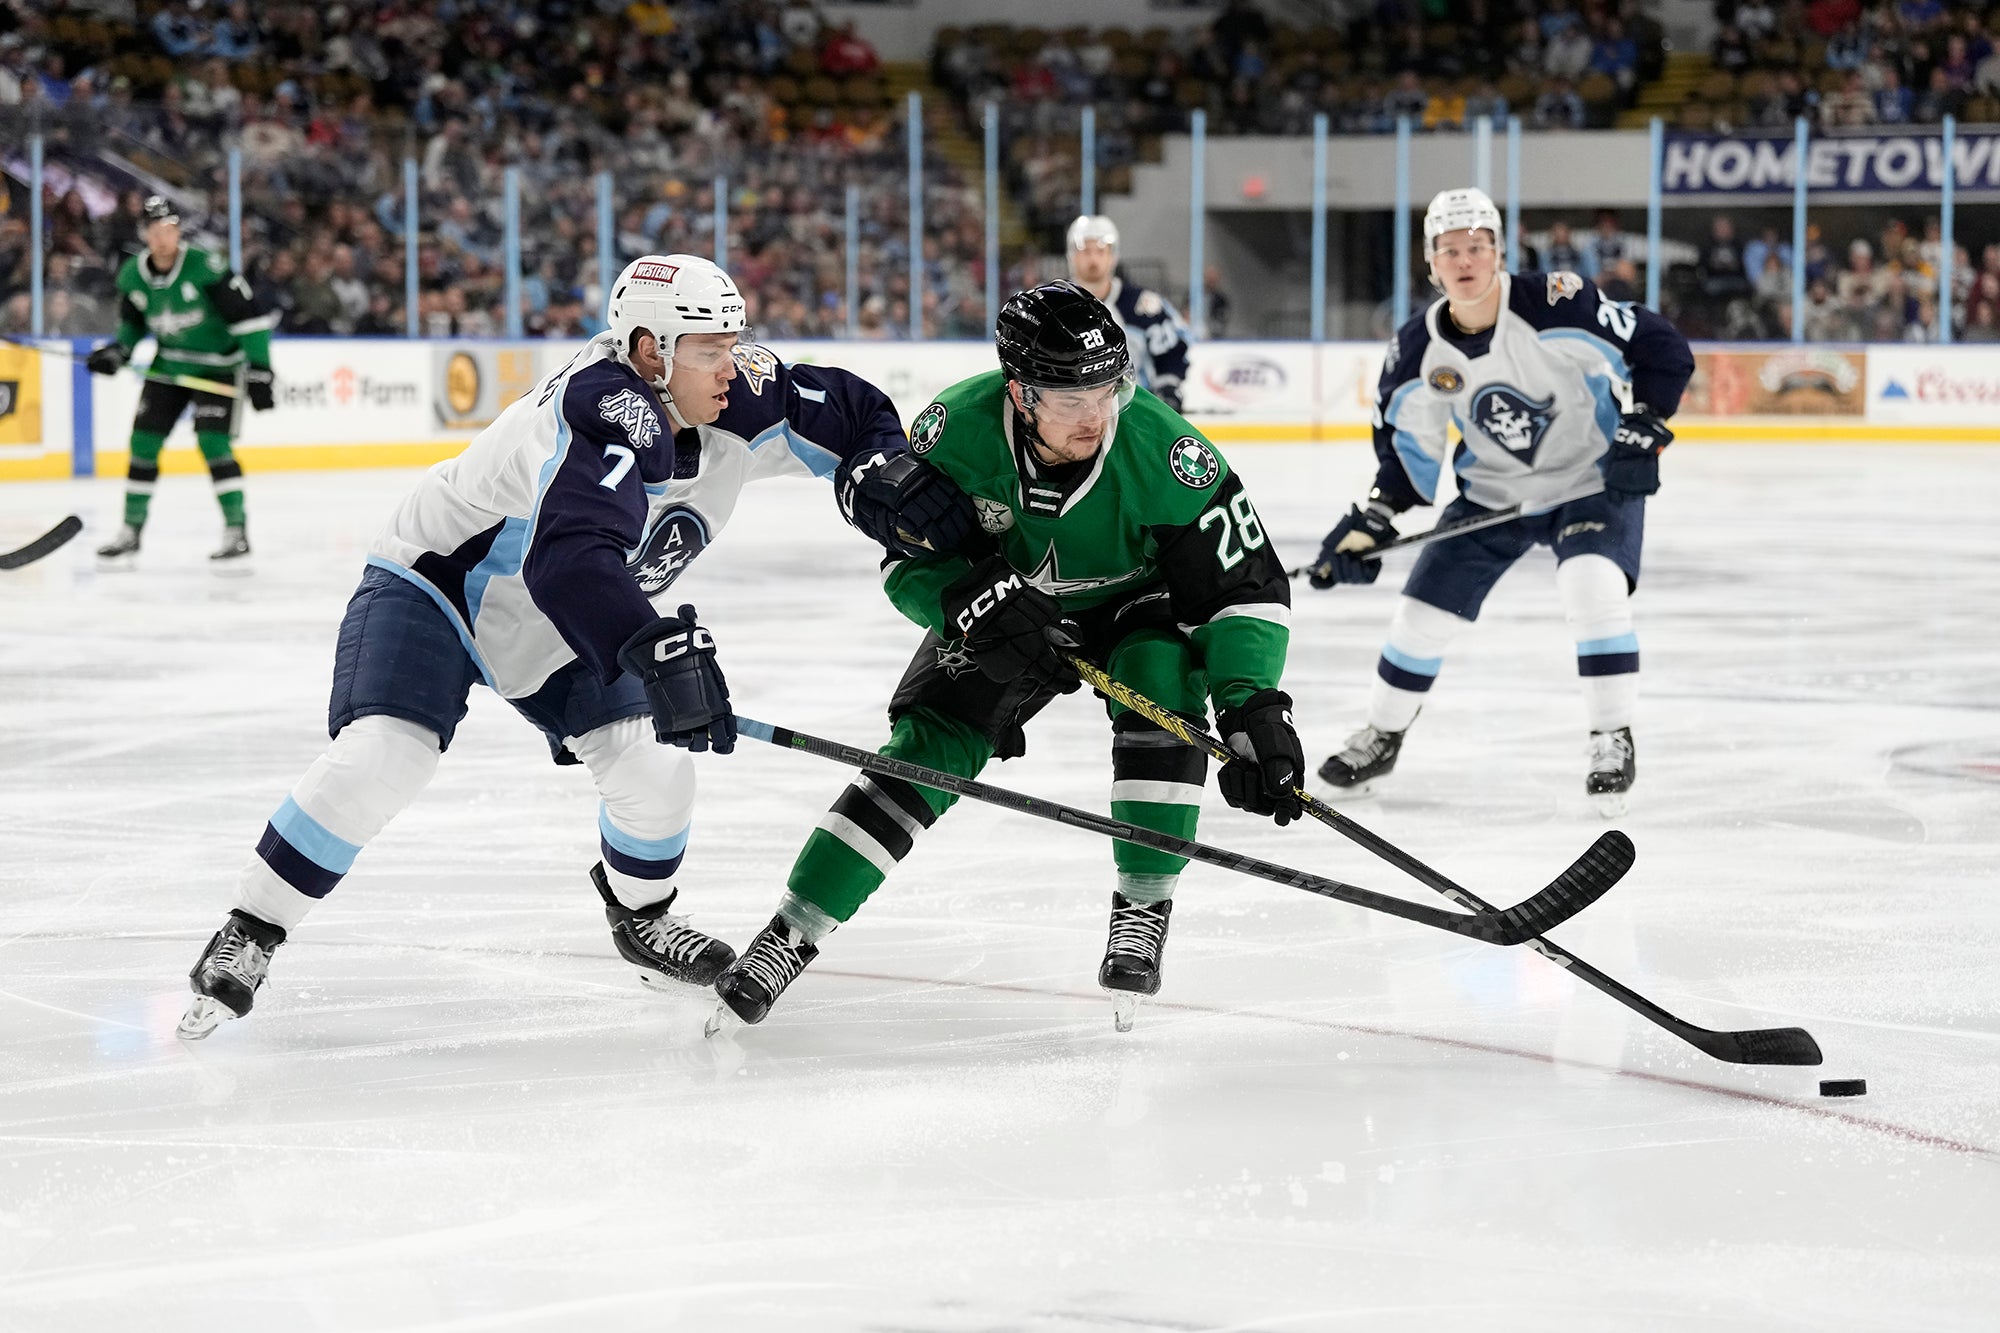 Stars Fall Short in Chicago after Fast Start, Texas Stars